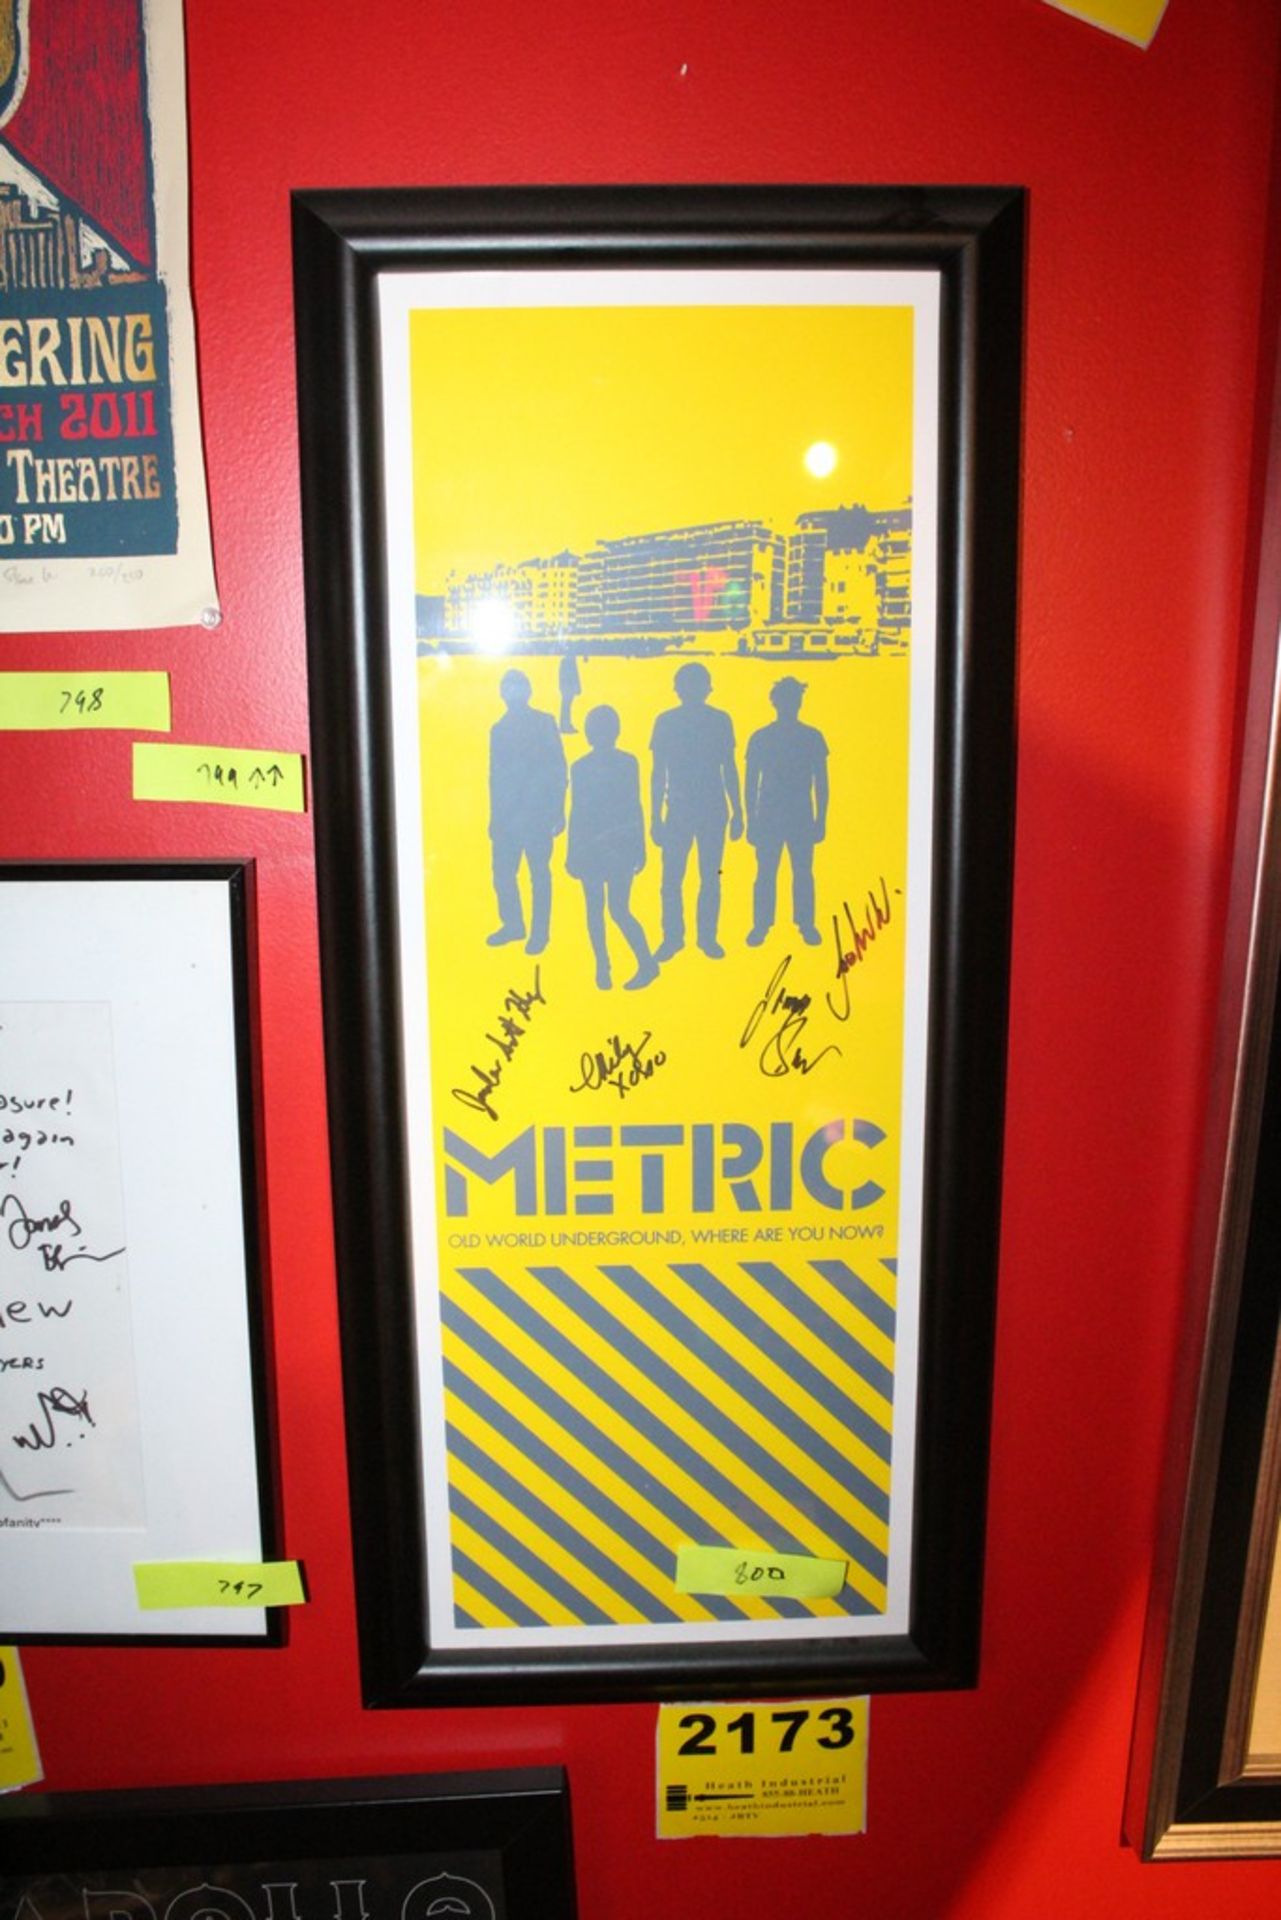 Metric "Old World Underground, Where are You Now? Signed Framed Poster